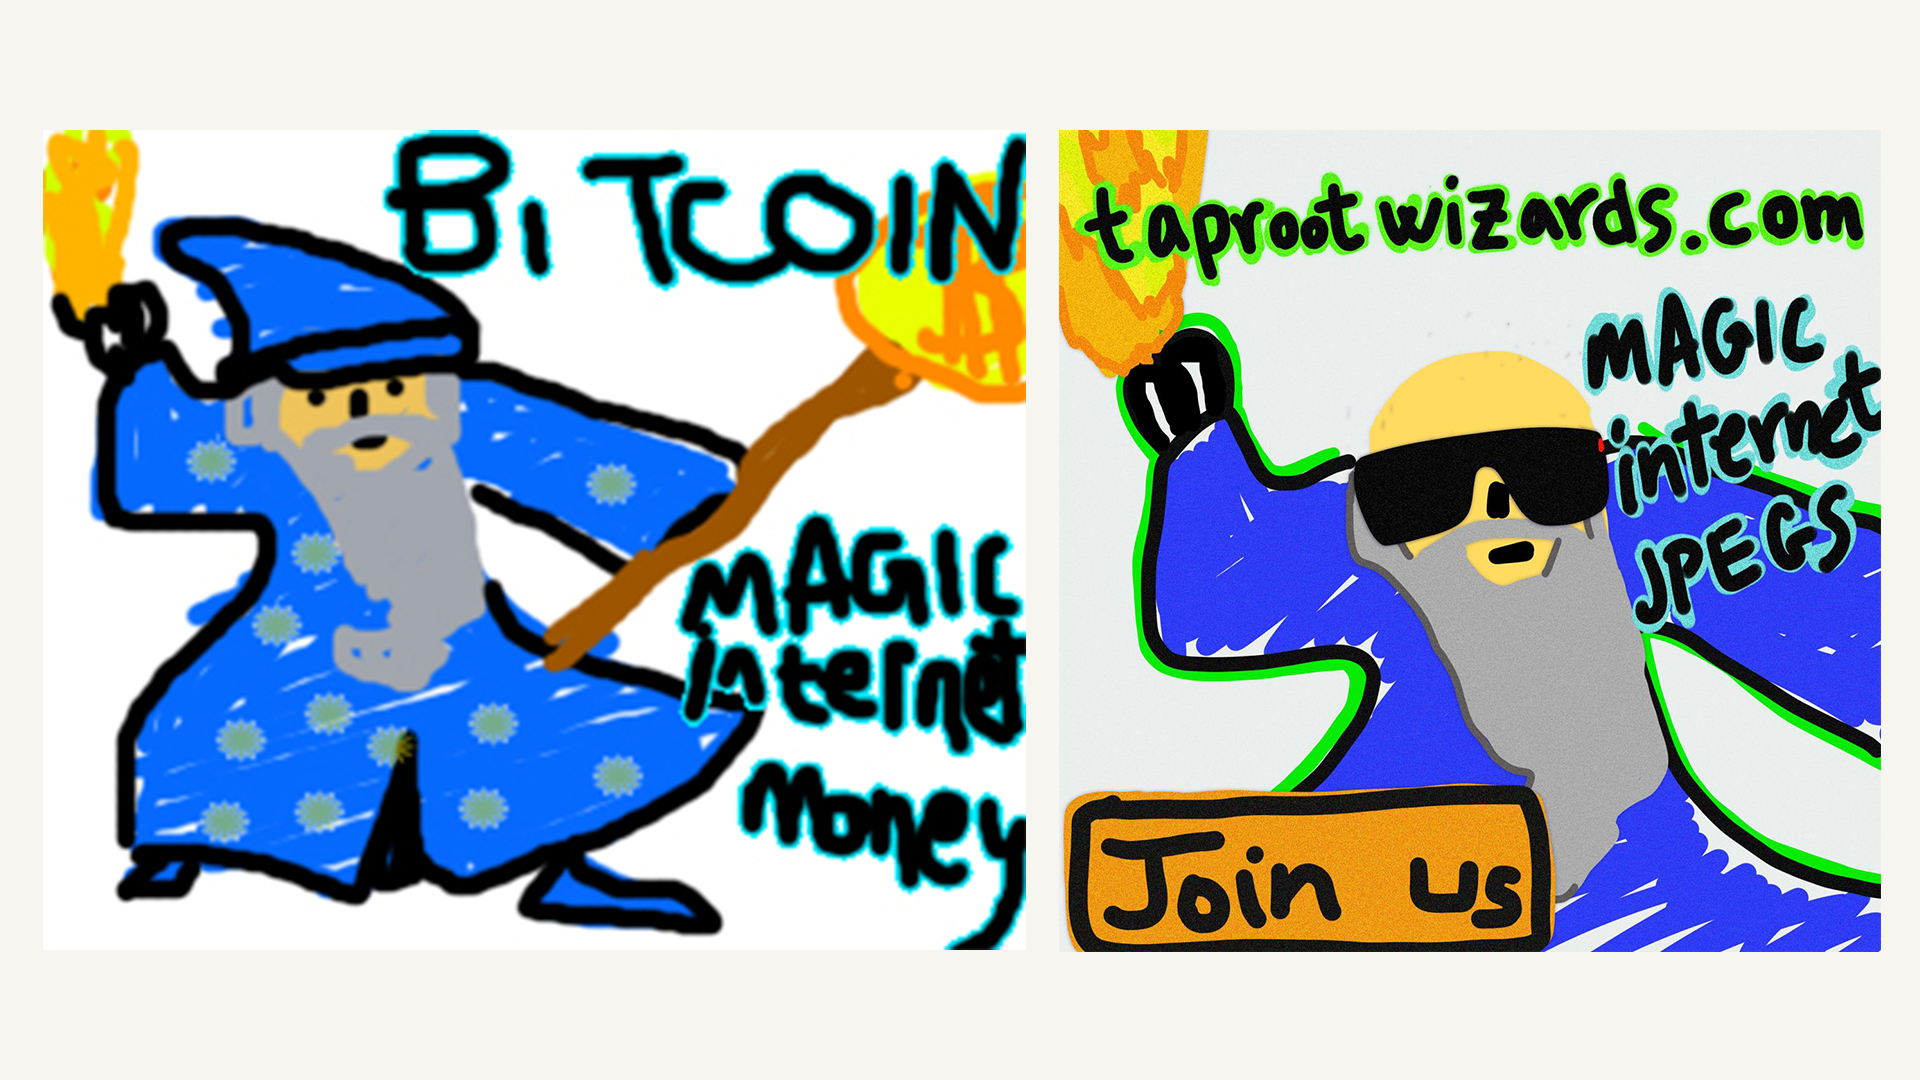 Udi's Taproot Wizard pays homage to one of the Bitcoin community's earliest memes and most successful marketing stunts. 